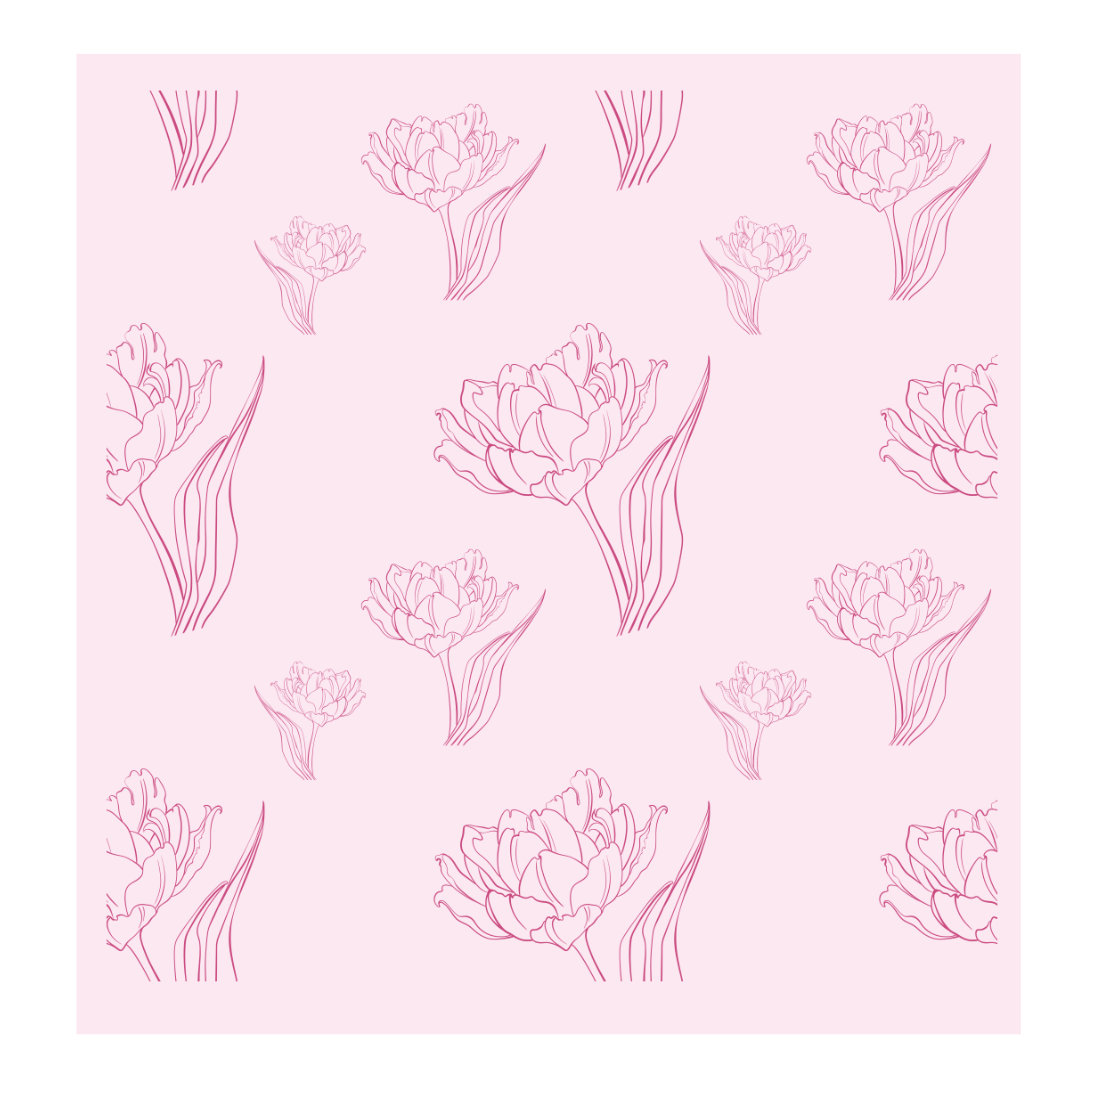 Pattern of pink flowers on a pink background.